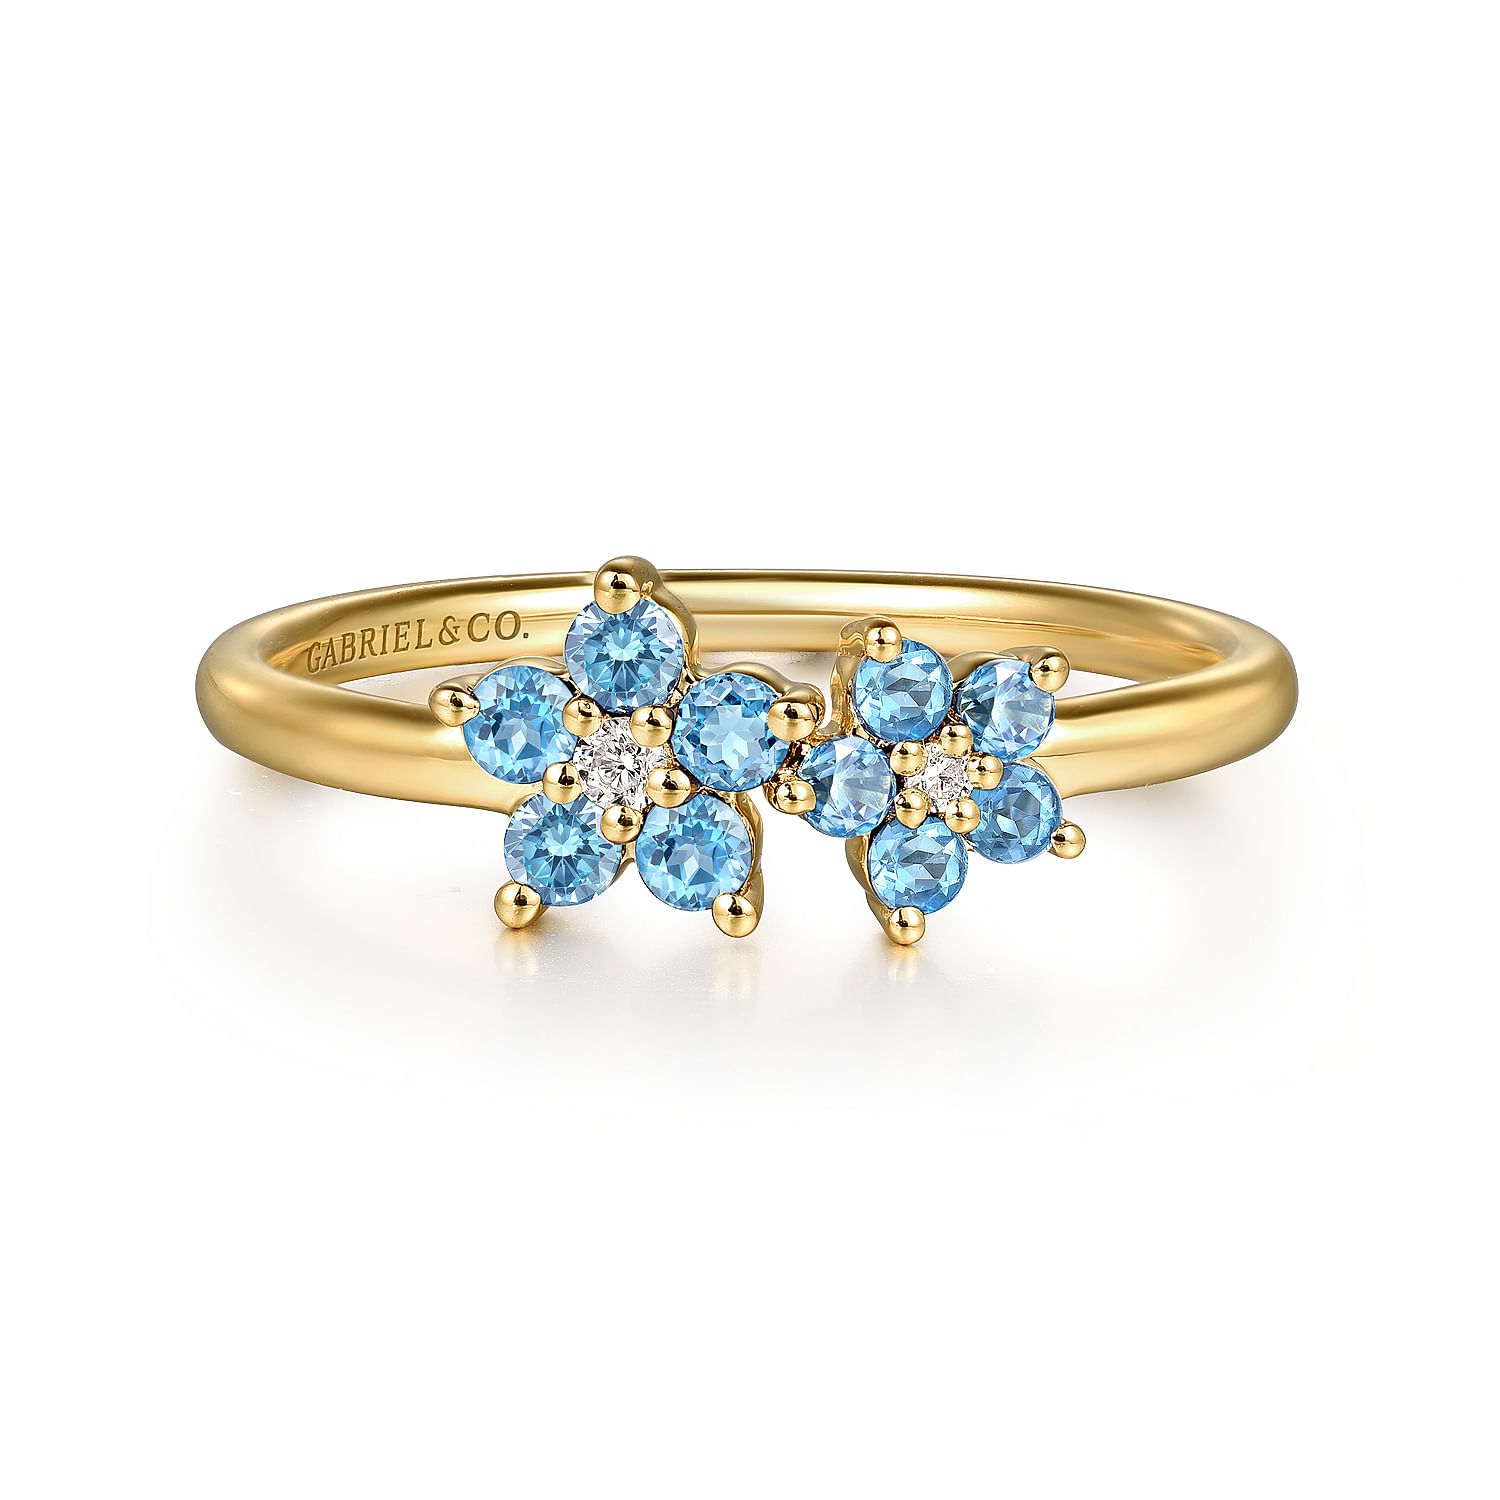 14K Yellow Gold Diamond And Blue Topaz Classic Ring